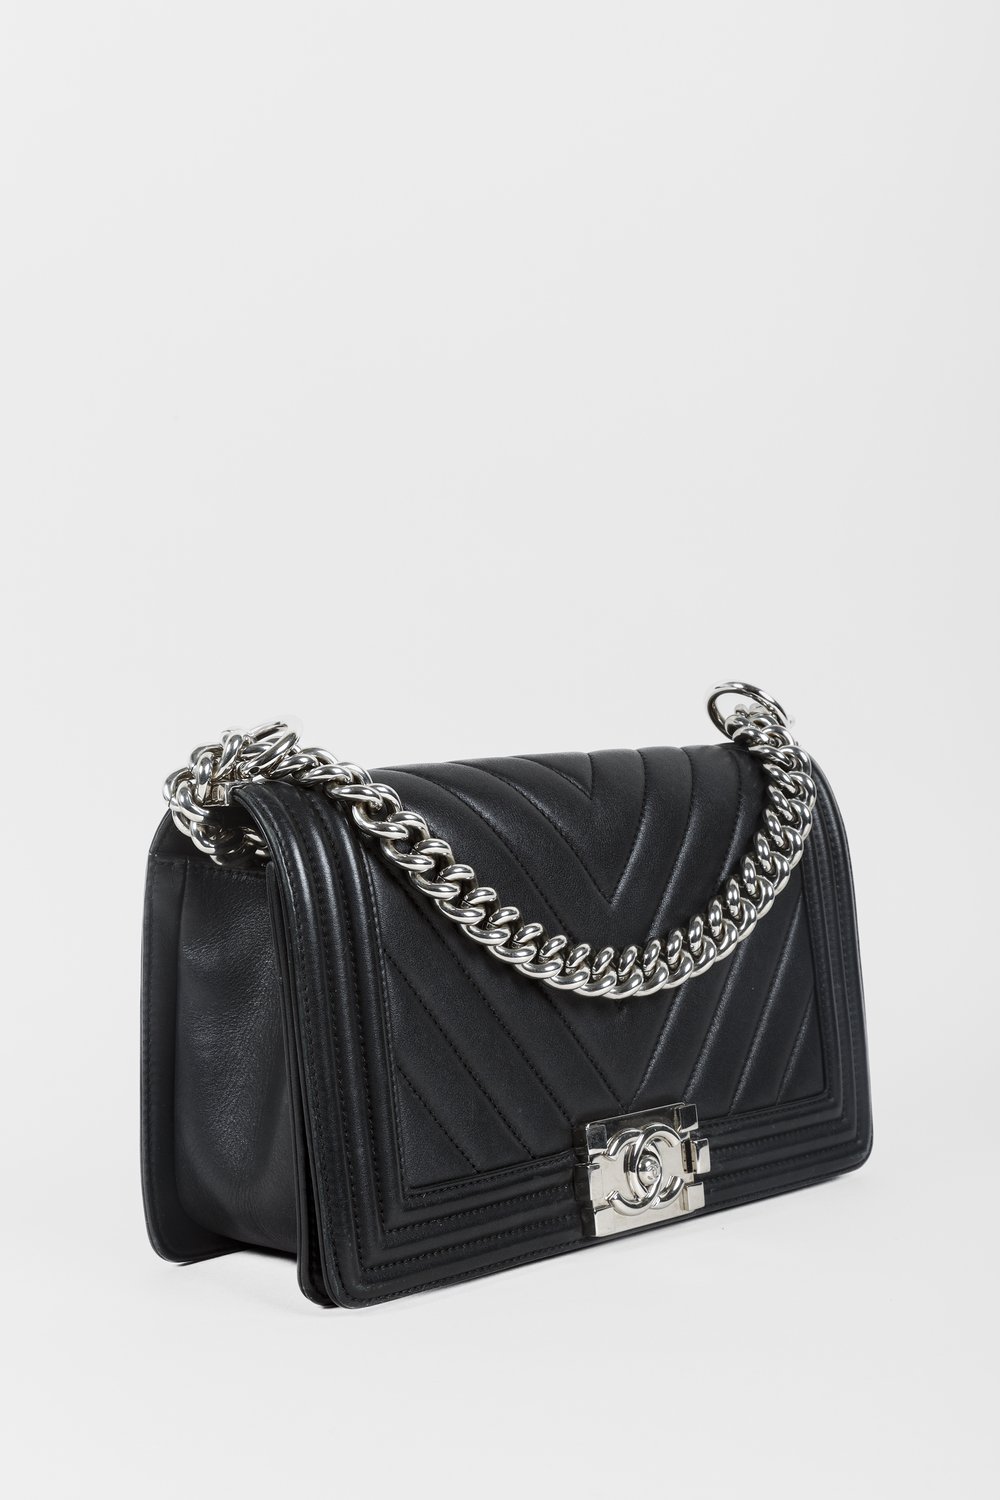 Chanel Black Quilted Boy Bag SHW — BLOGGER ARMOIRE